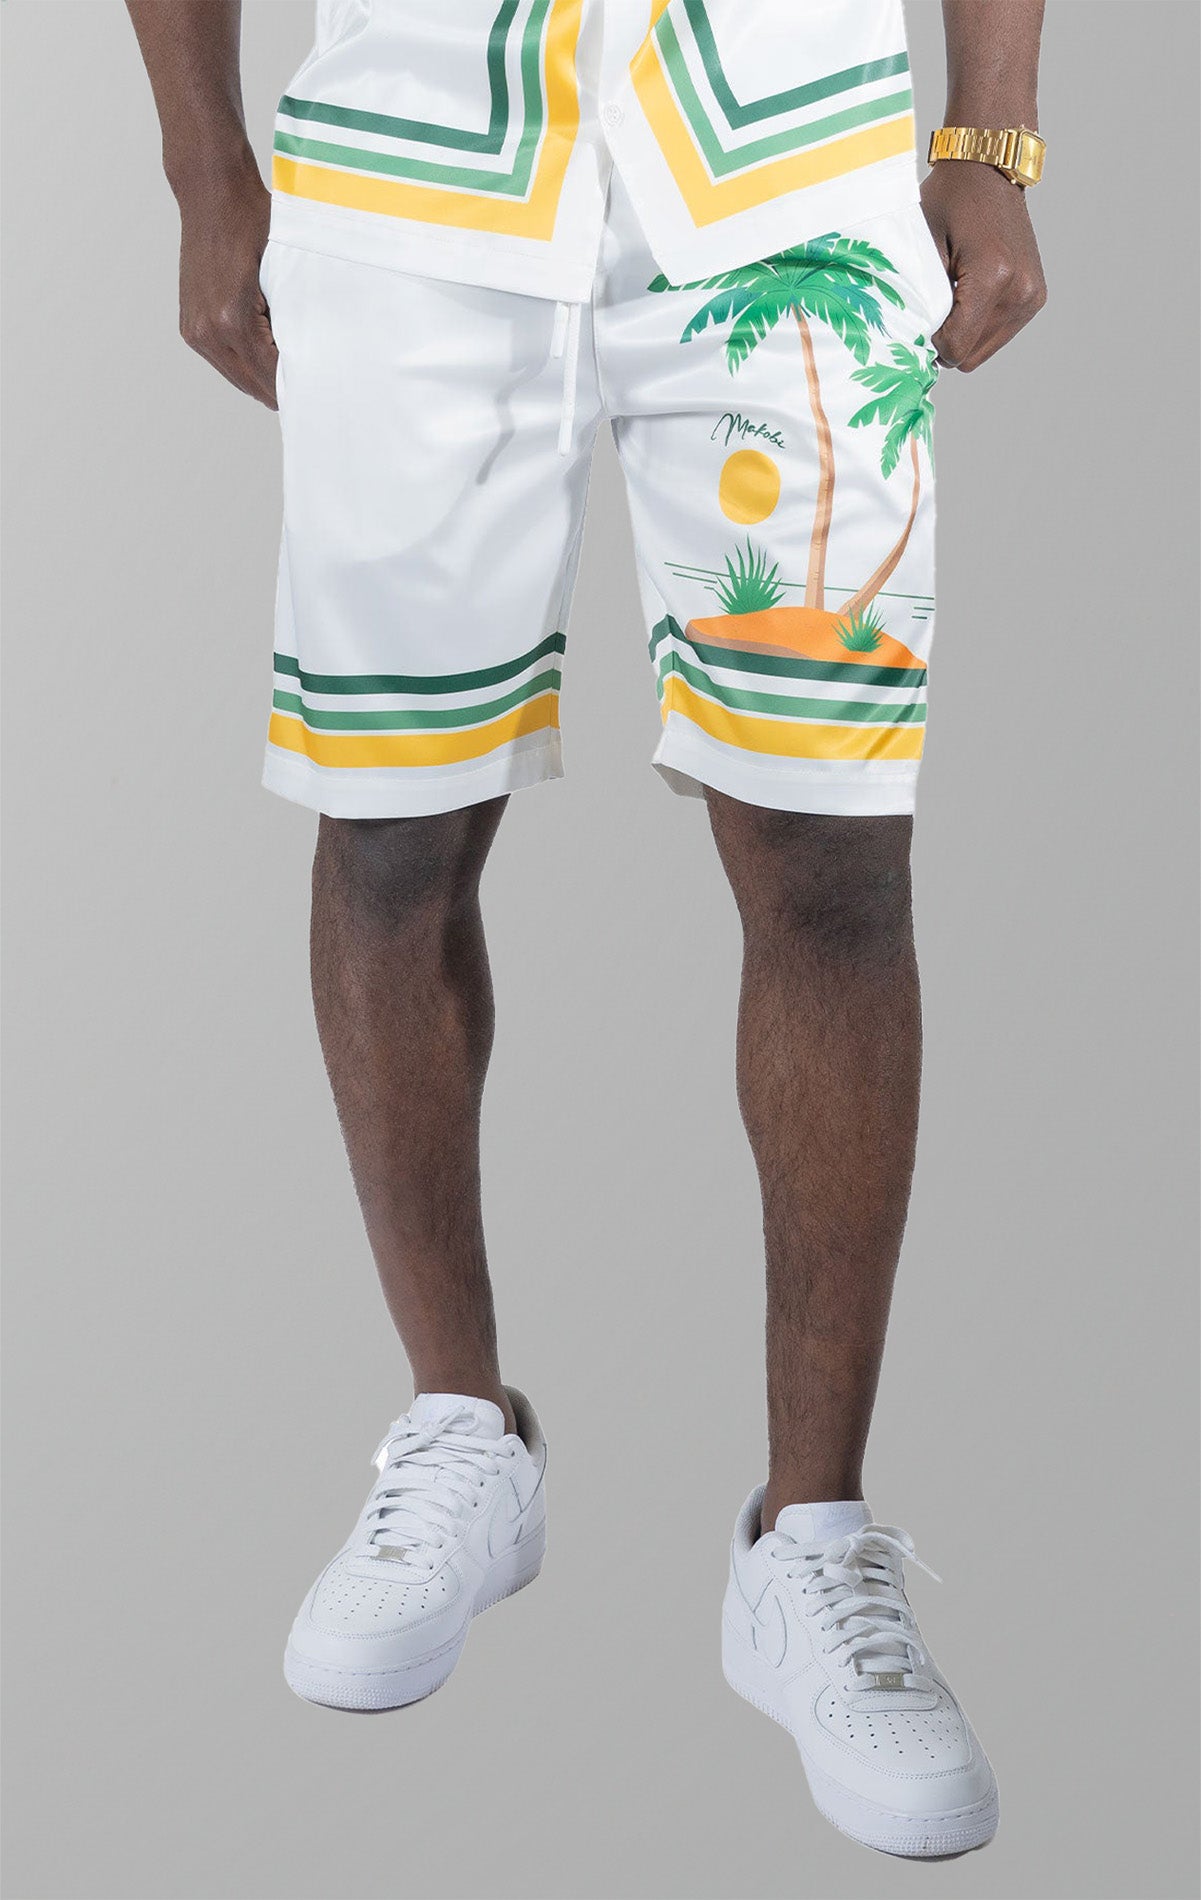 Short set top and matching shorts. Made from 100% polyester fabric for a comfortable fit and easy movement. Designed in Los Angeles with a unique sublimation print. True to size.